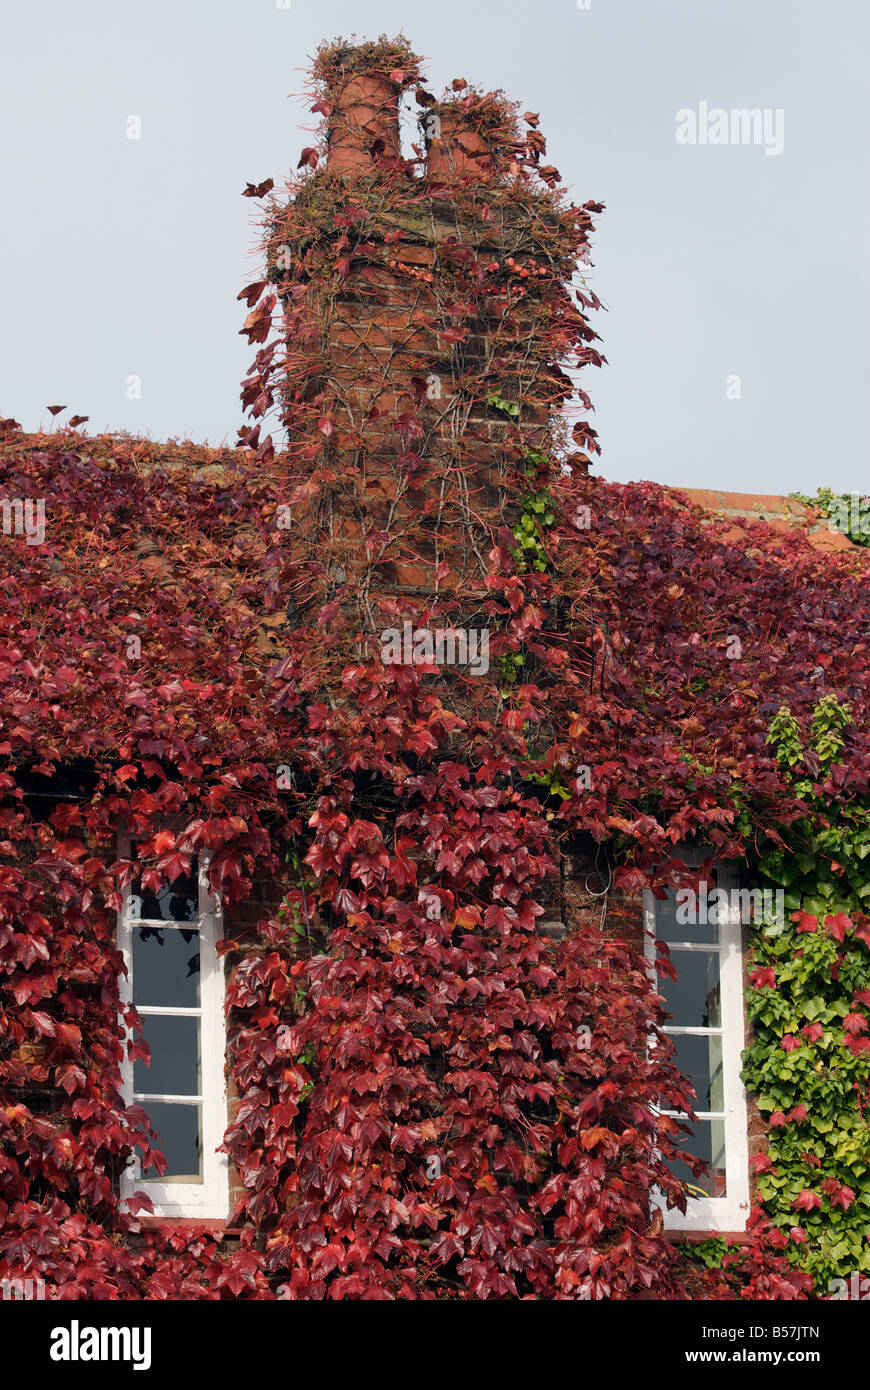 Creeping Ivy coving a house in Snape, Suffolk, UK. Stock Photo